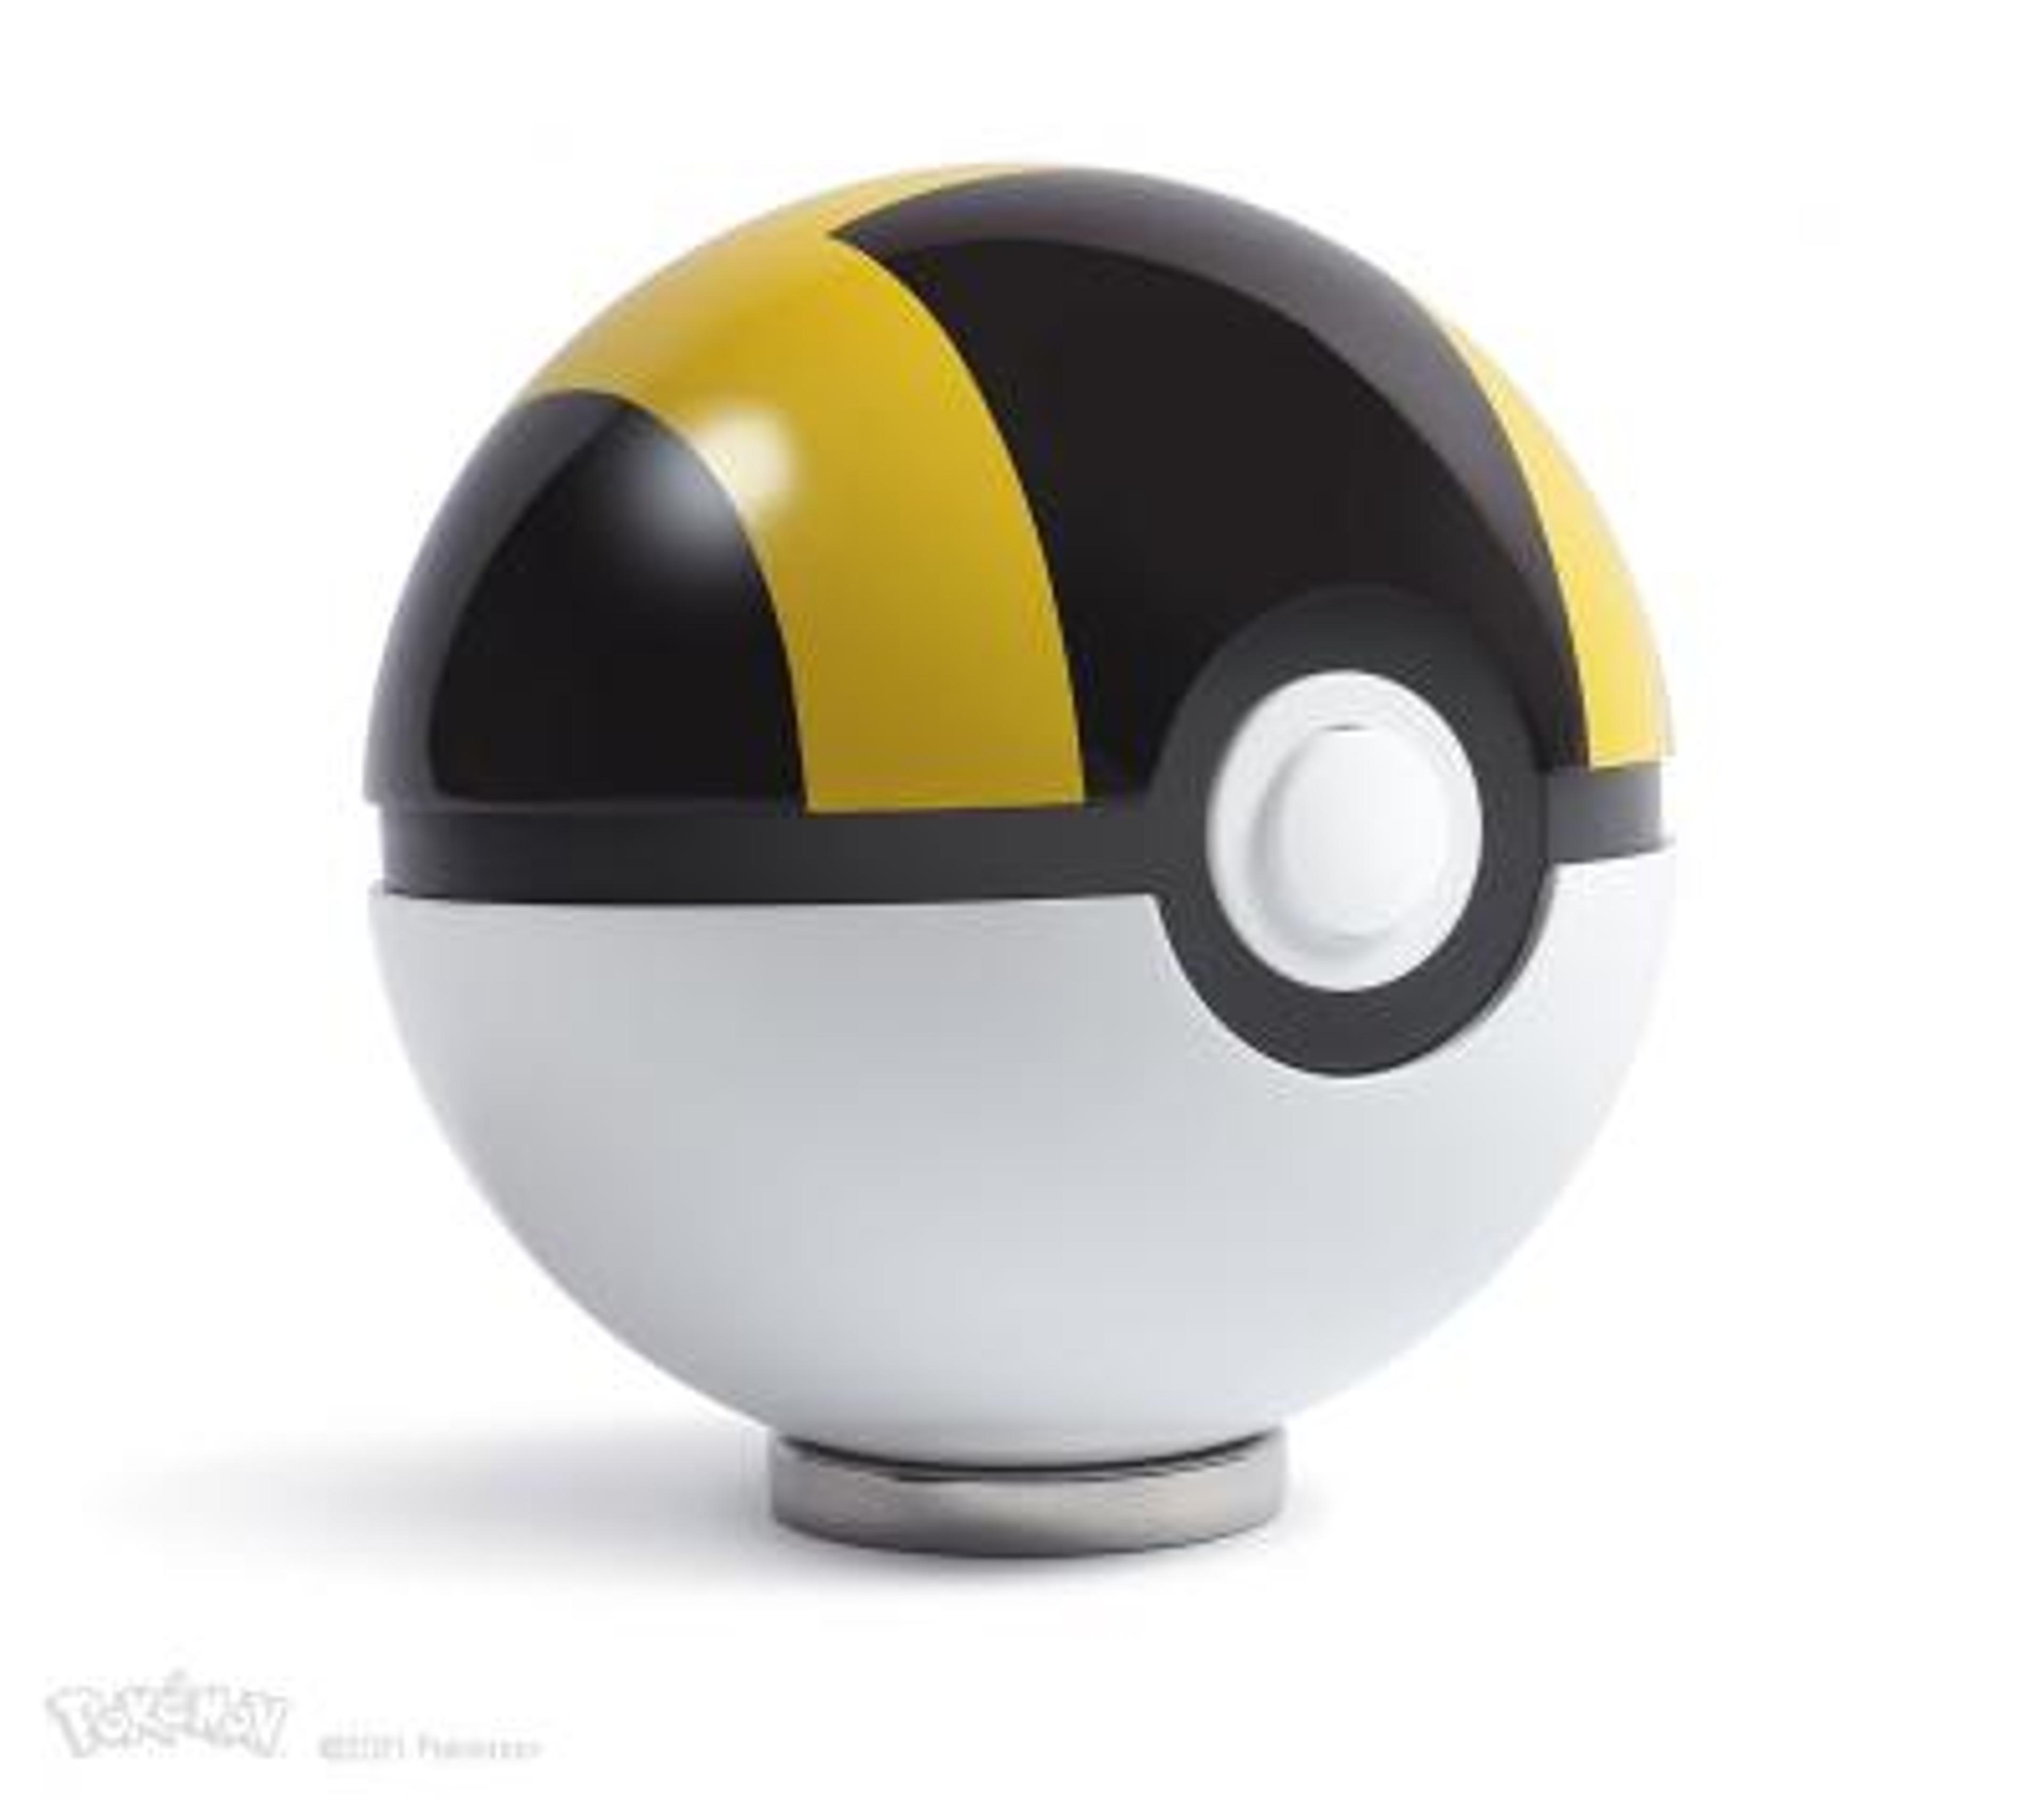 Alternate View 3 of ULTRA BALL Replica by The Wand Company